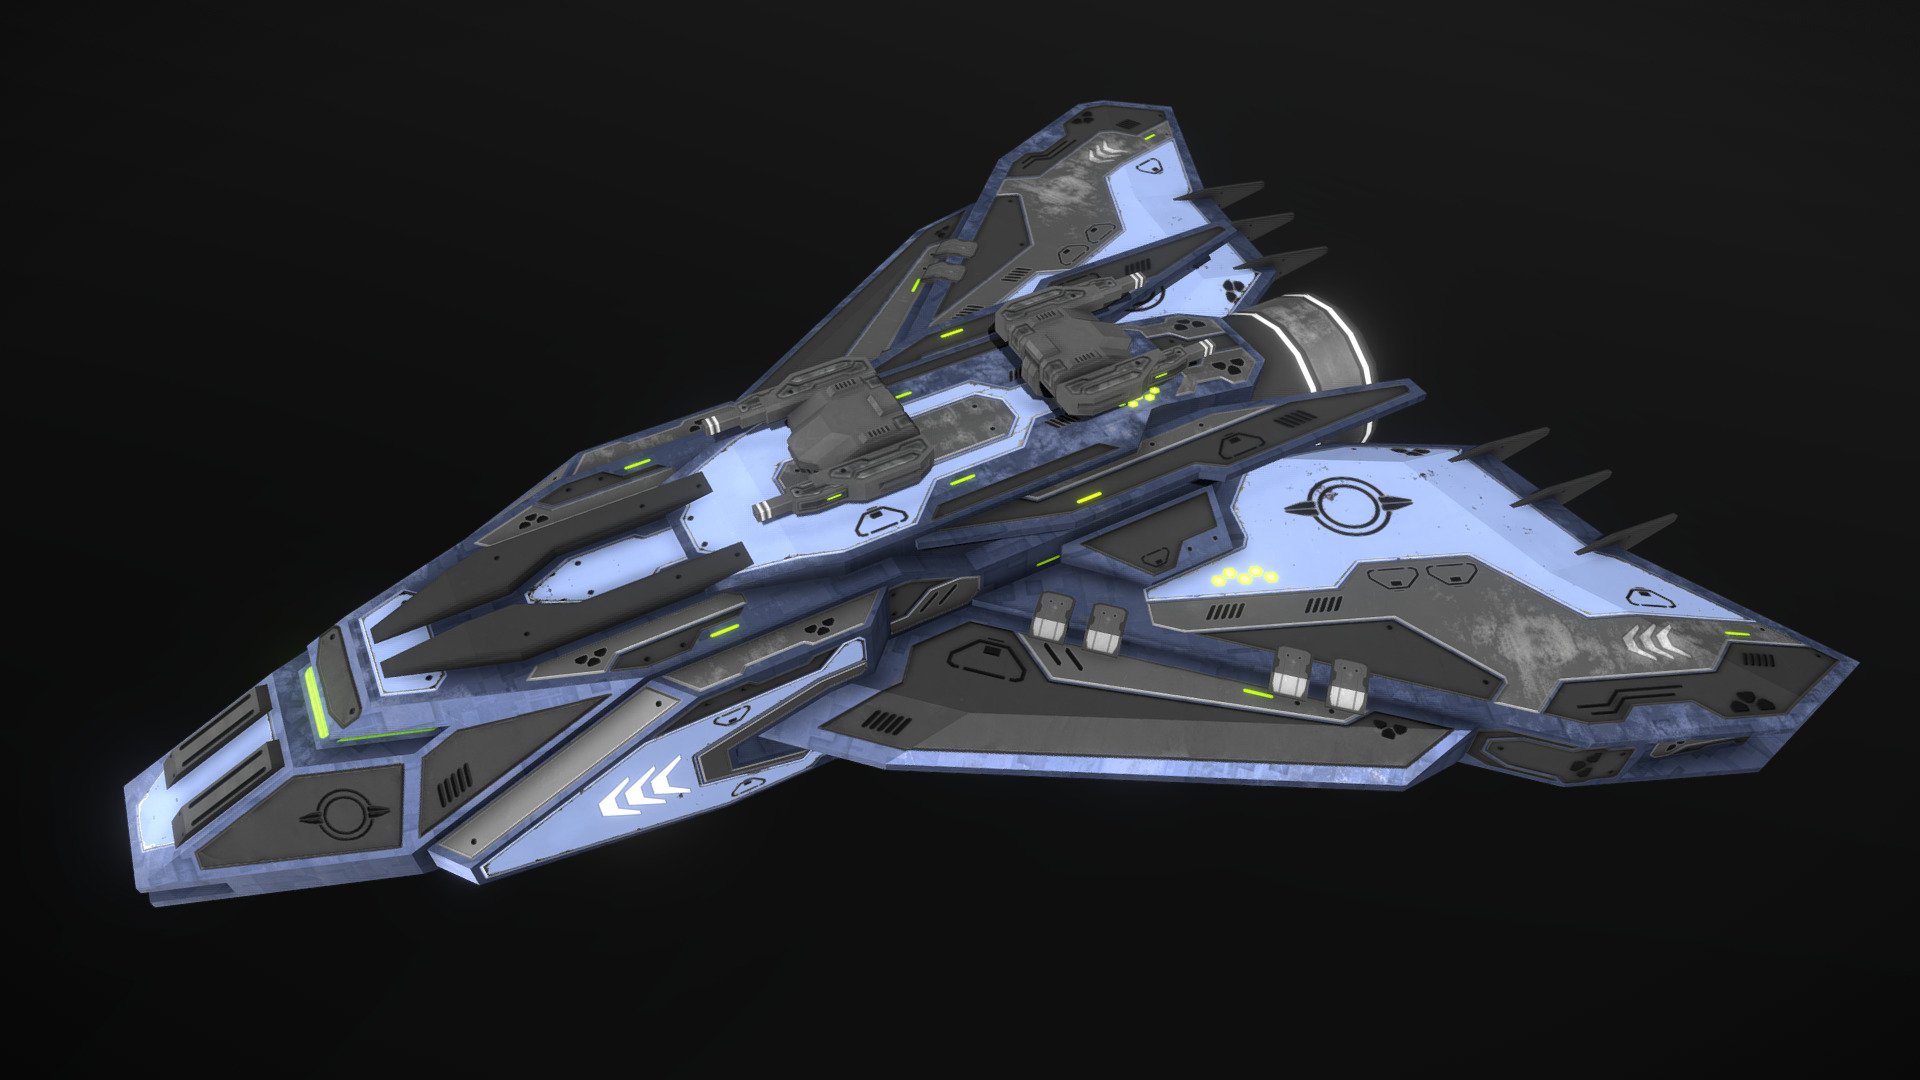 This is a model of a low-poly and game-ready scifi spaceship. 

The weapons are separate meshes and can be animated with a keyframe animation tool. The weapon loadout can be changed too. 

The model comes with several differently colored texture sets. The PSD file with intact layers is included.

If you have purchased this model please make sure to download the “additional file”.  It contains FBX and OBJ meshes, full resolution textures and the source PSDs with intact layers. The meshes are separate and can be animated (e.g. firing animations for gun barrels, rotating turrets, etc) 3d model